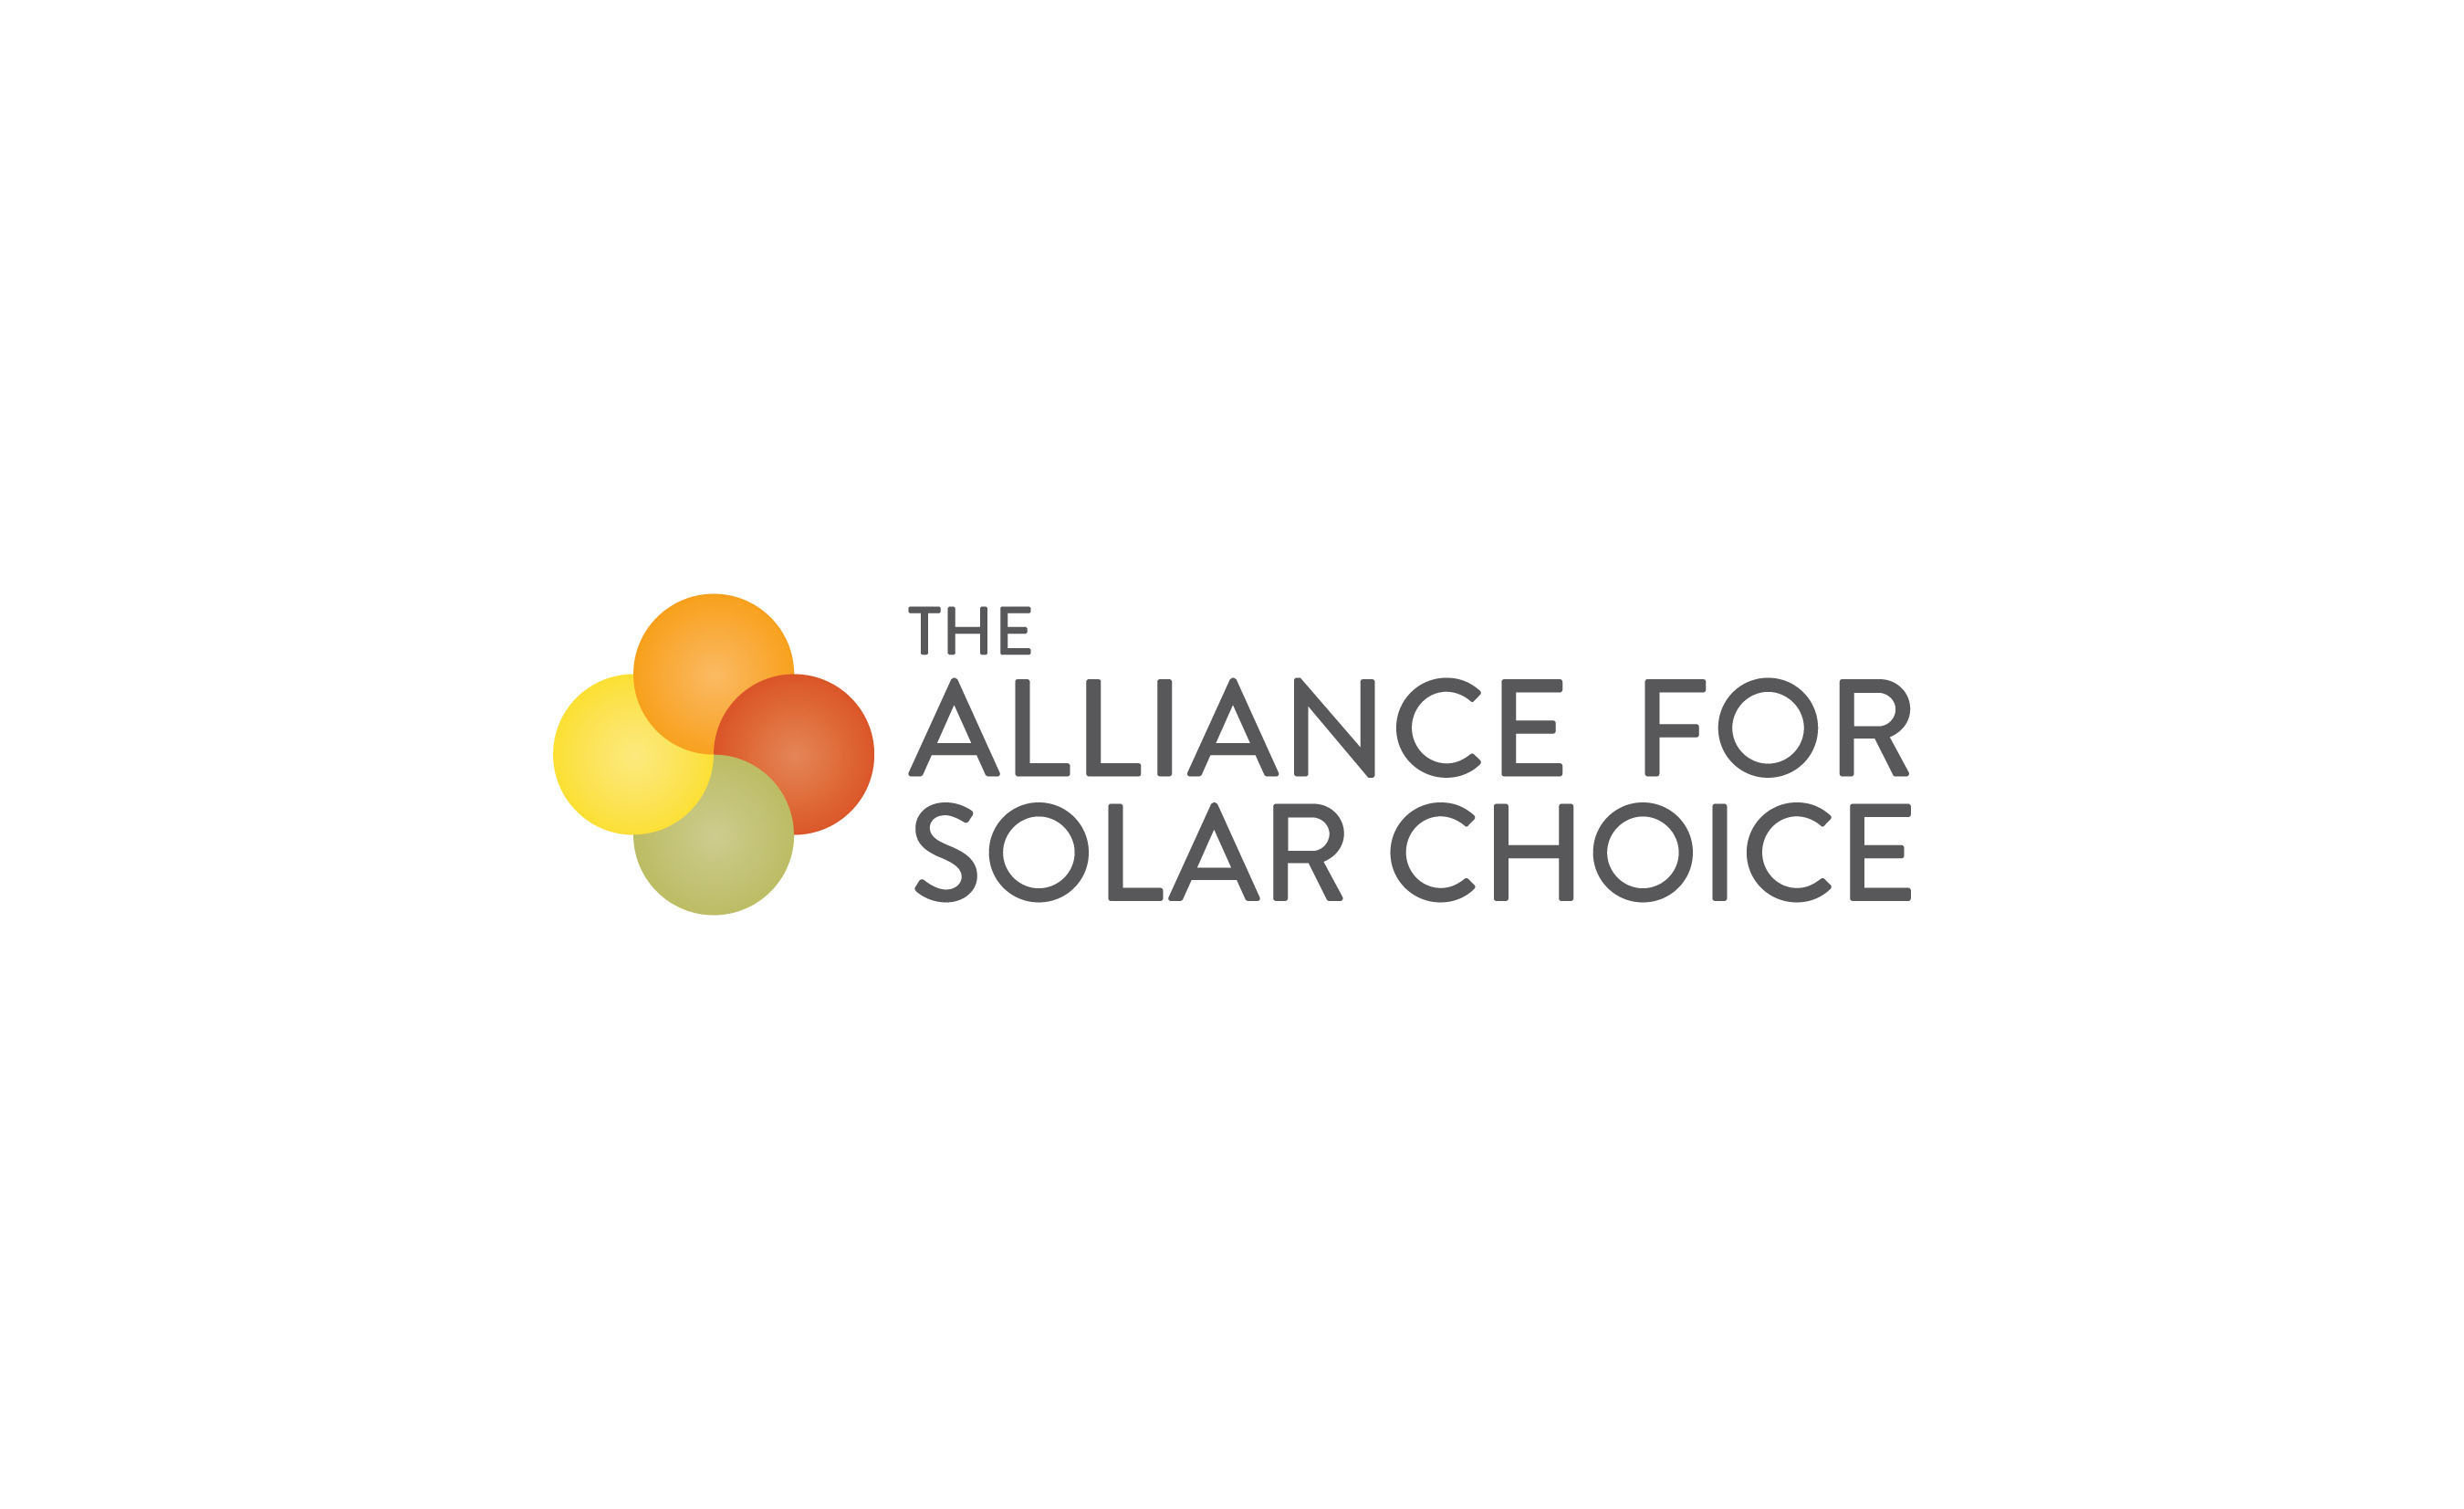 The Alliance for Solar Choice is a coalition of rooftop solar installers dedicated to protecting and promoting net energy metering.